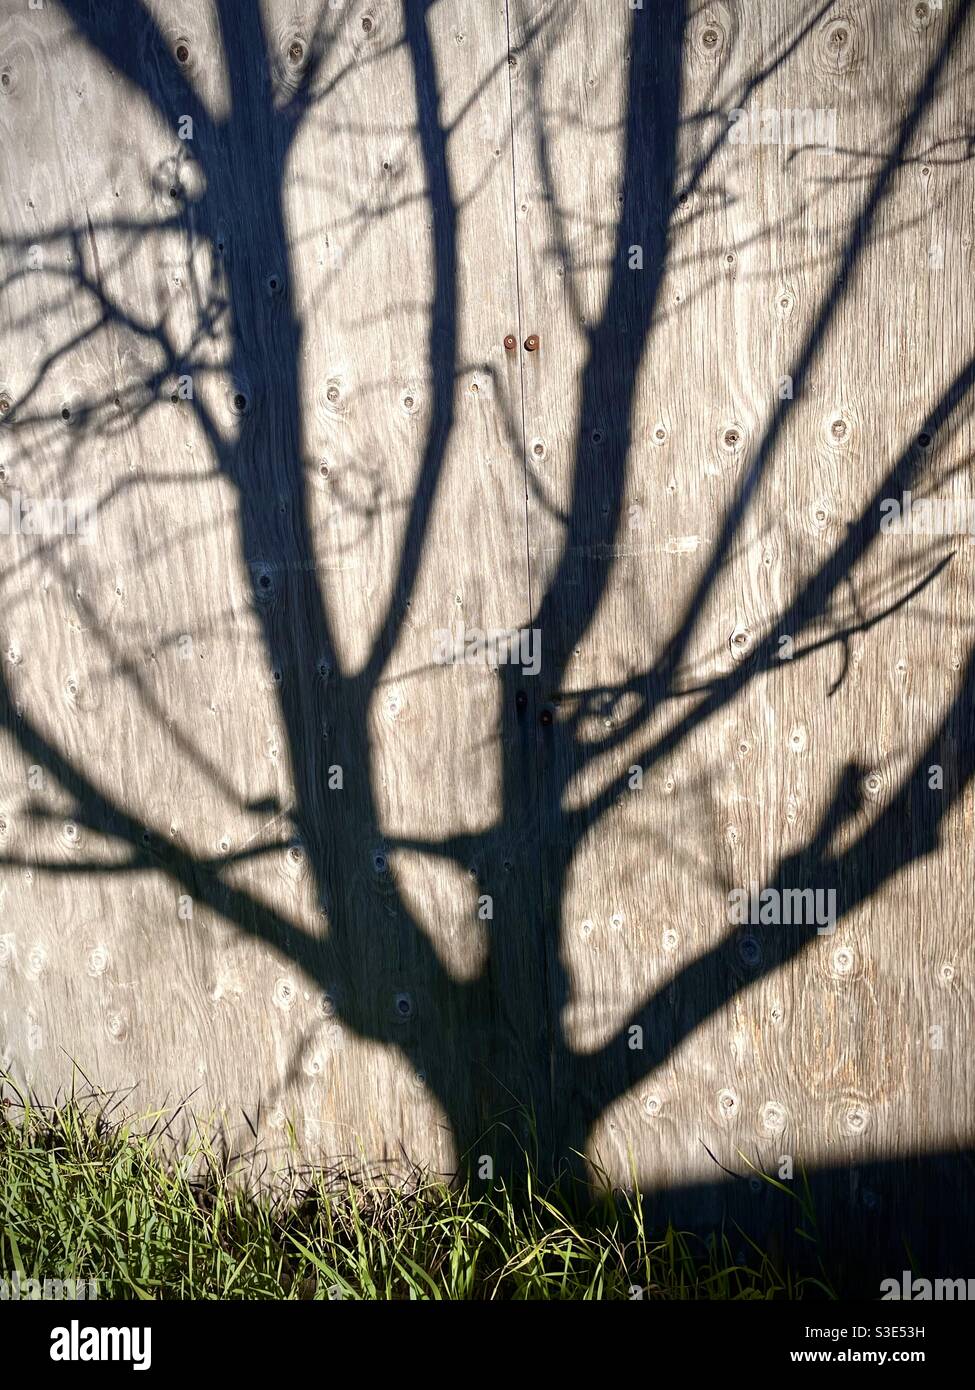 Shadow silhouette of a tree of a wooden fence Stock Photo